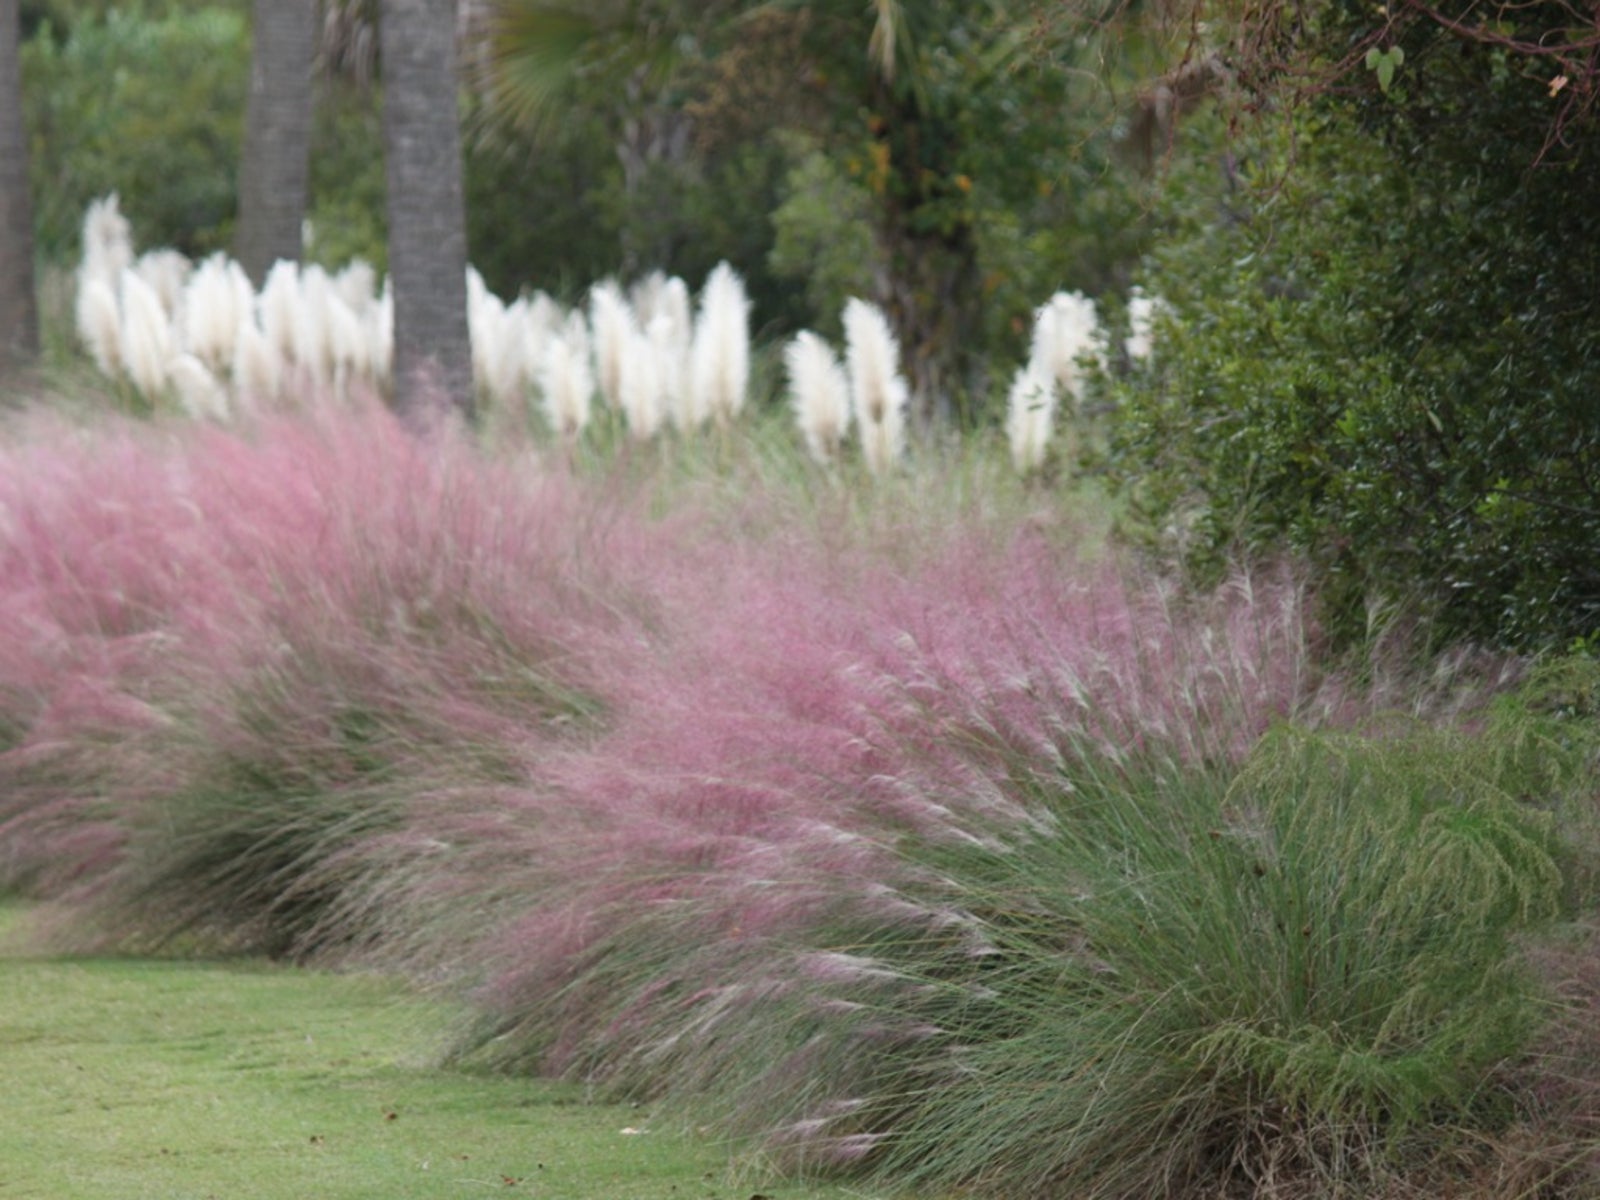 Growing Ornamental Grasses Learn More About Ornamental Grass In ...